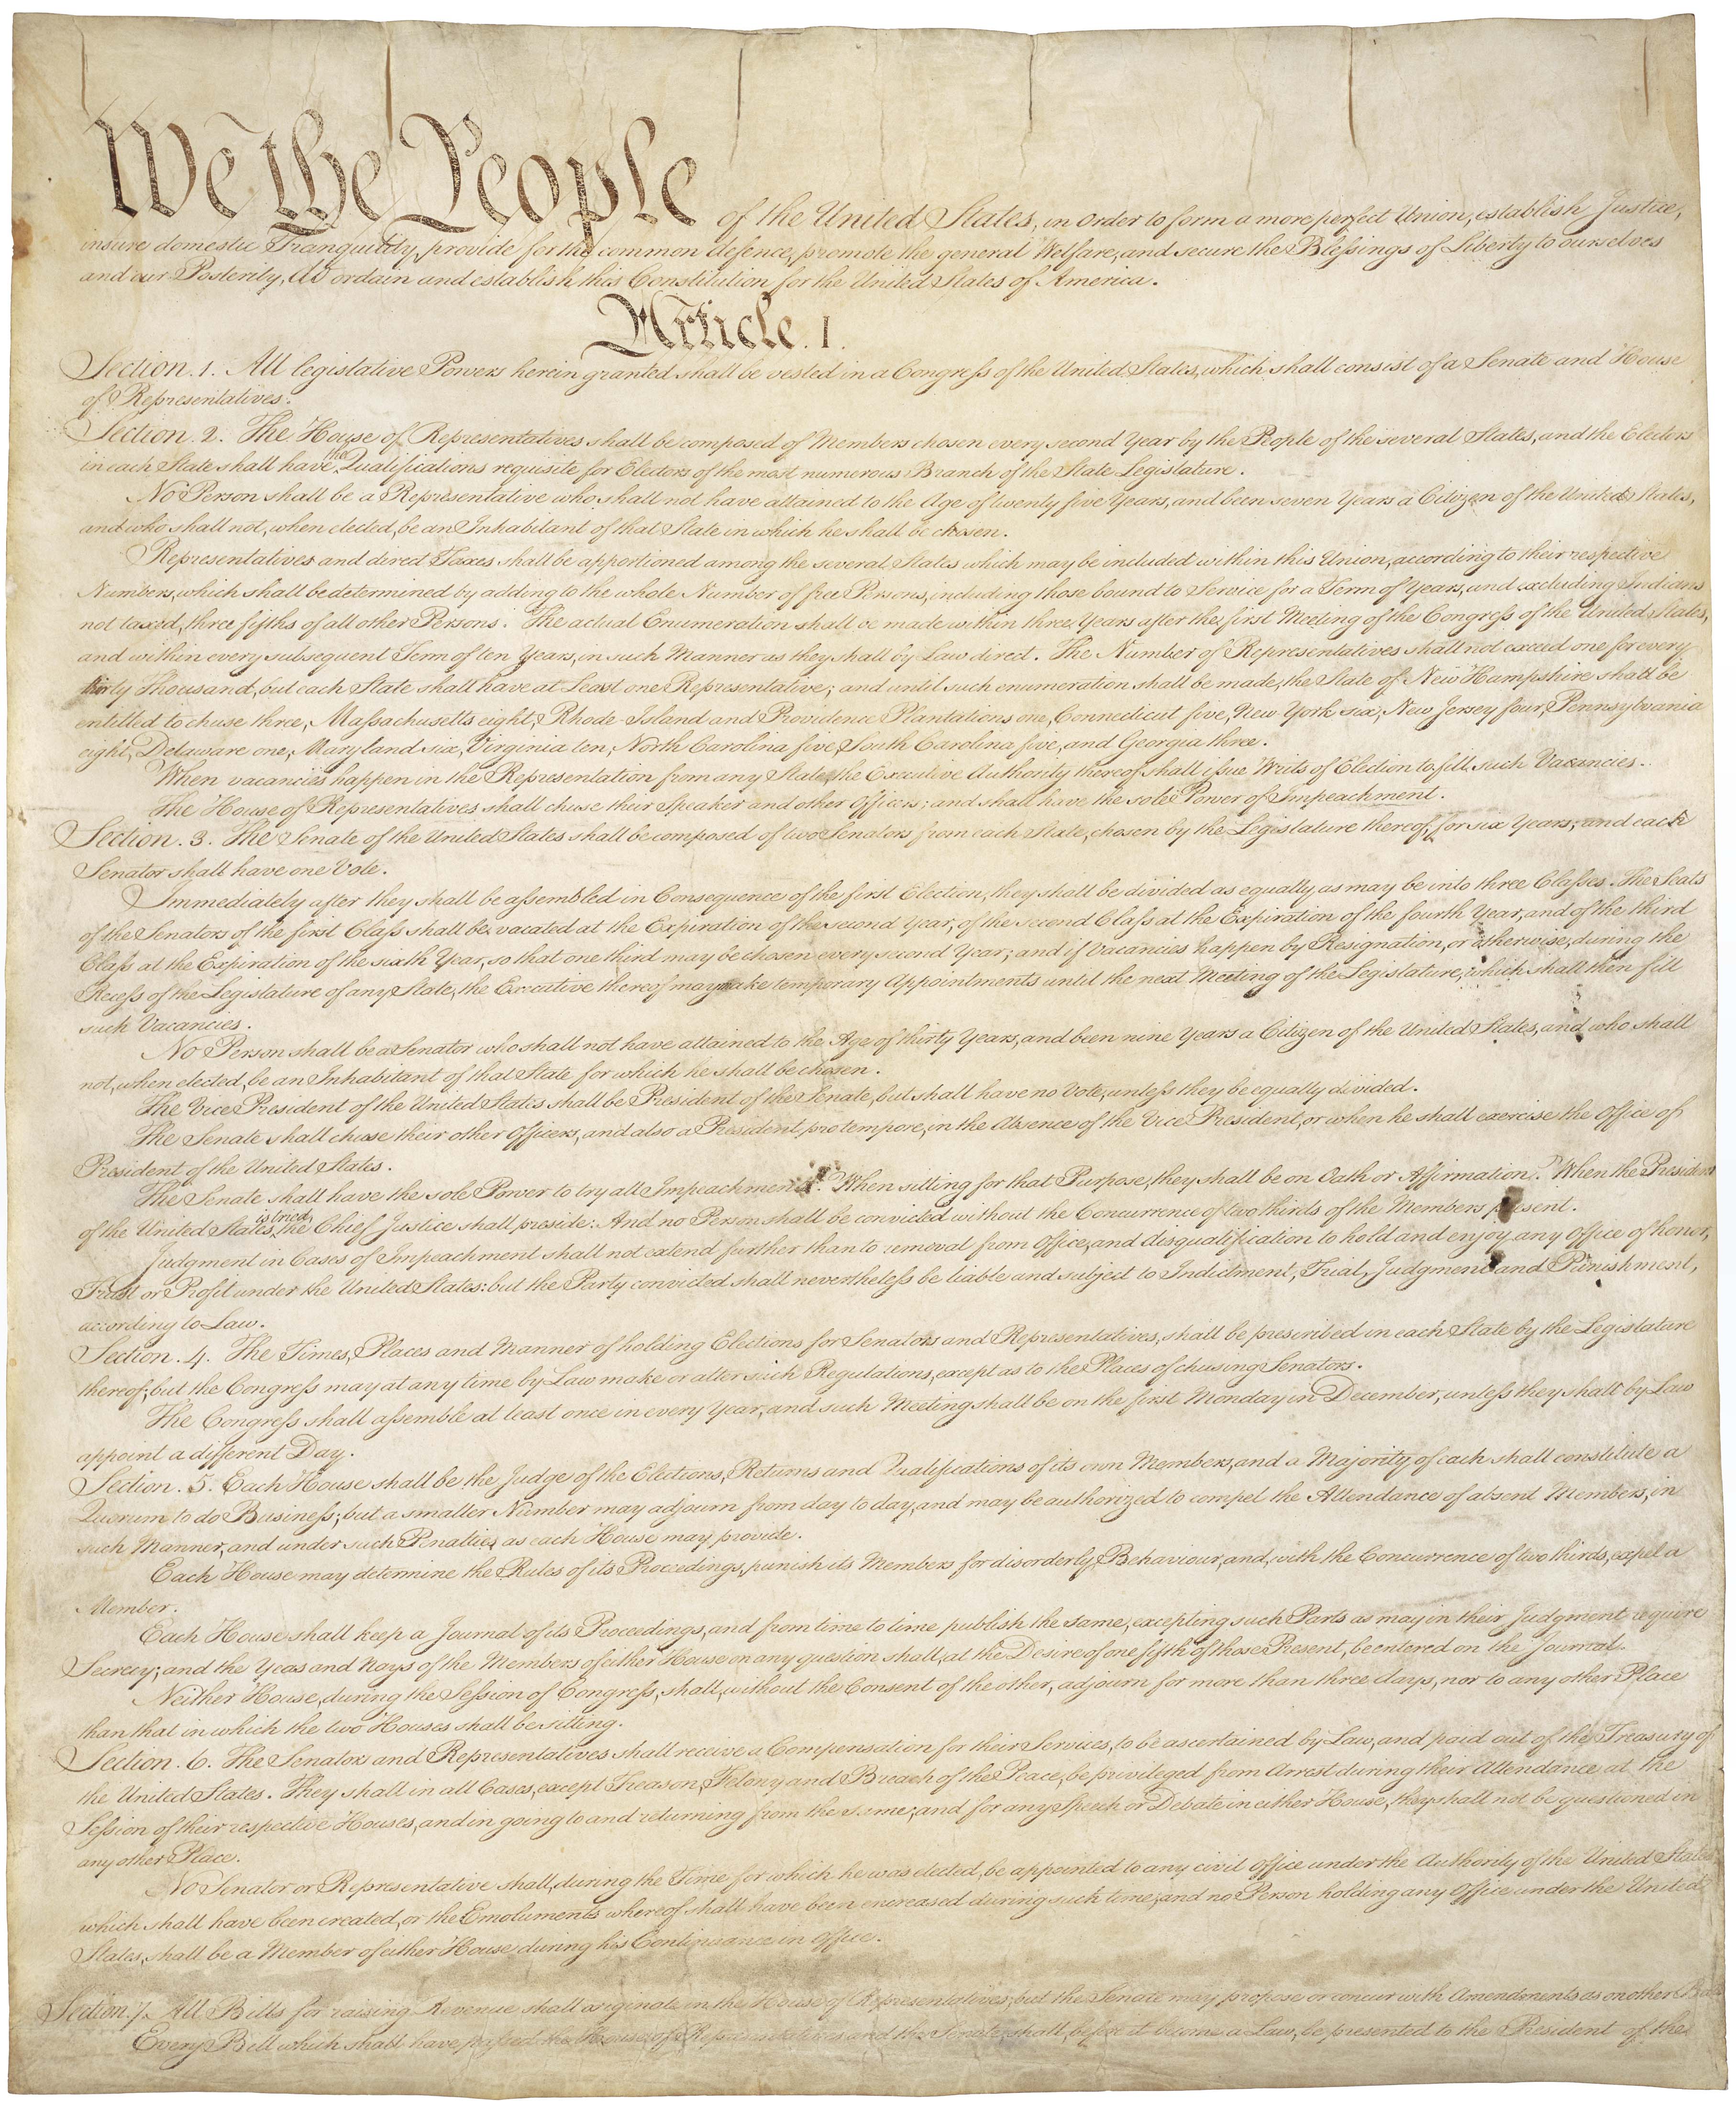 Pocket Constitution and Declaration of Independence